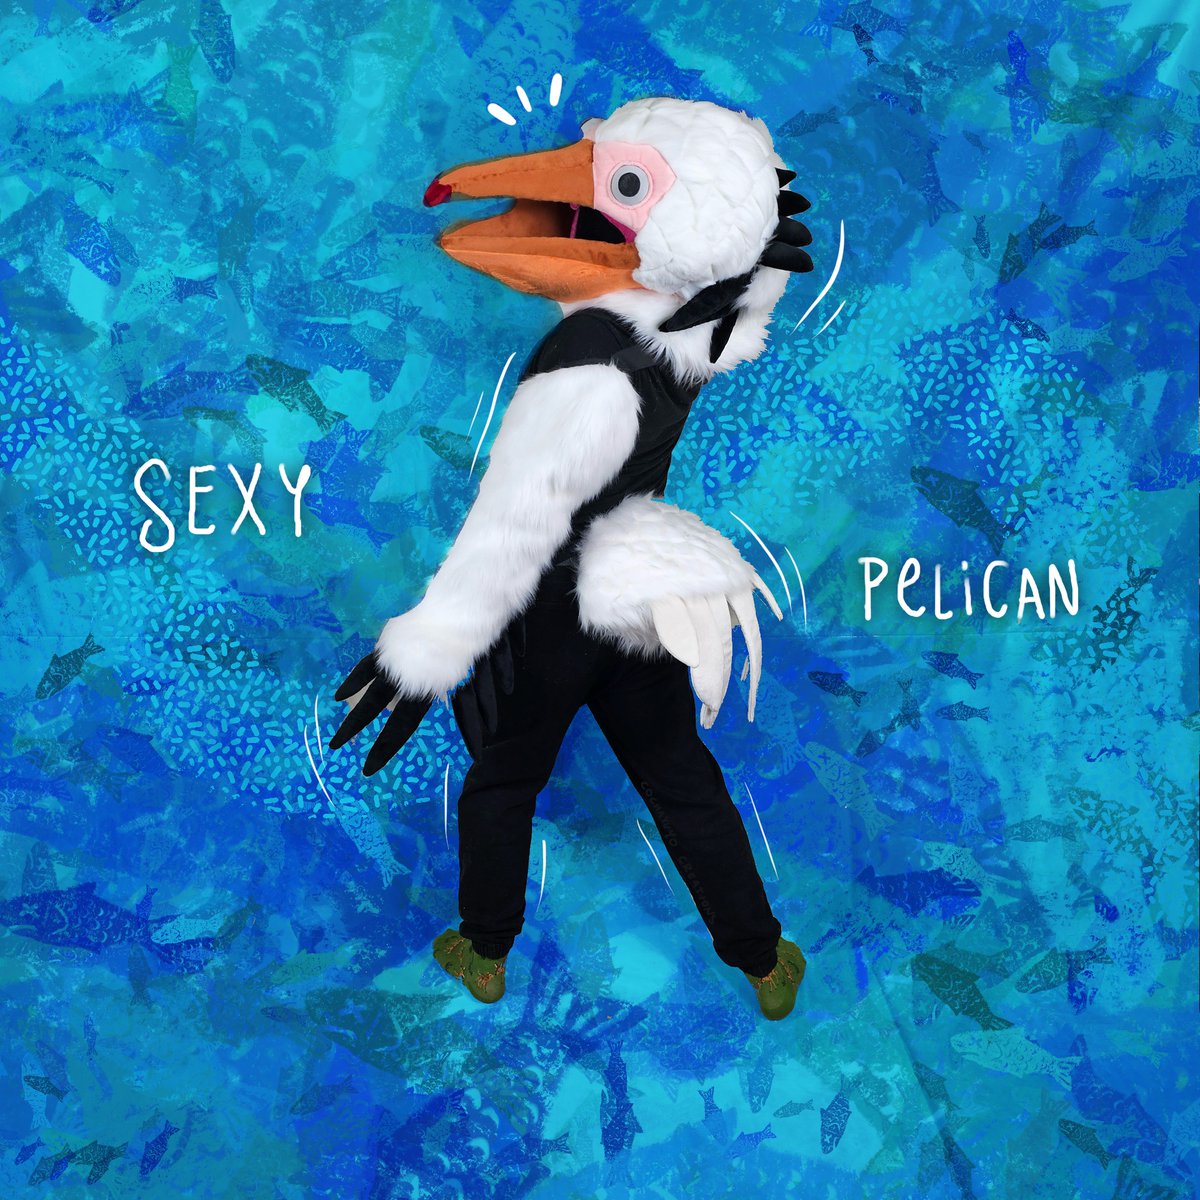 WATCH OUT! ITS A PELICAN! This hungry critter is ready to swoop in and have his fill out of some delicious fish! You can now just be a HUGE dumb bird. Only 1️⃣0️⃣0️⃣0️⃣ USD + shipping! Go bid at the link in my bio! #Fursuitfriday #avian #bigbird #birdsona